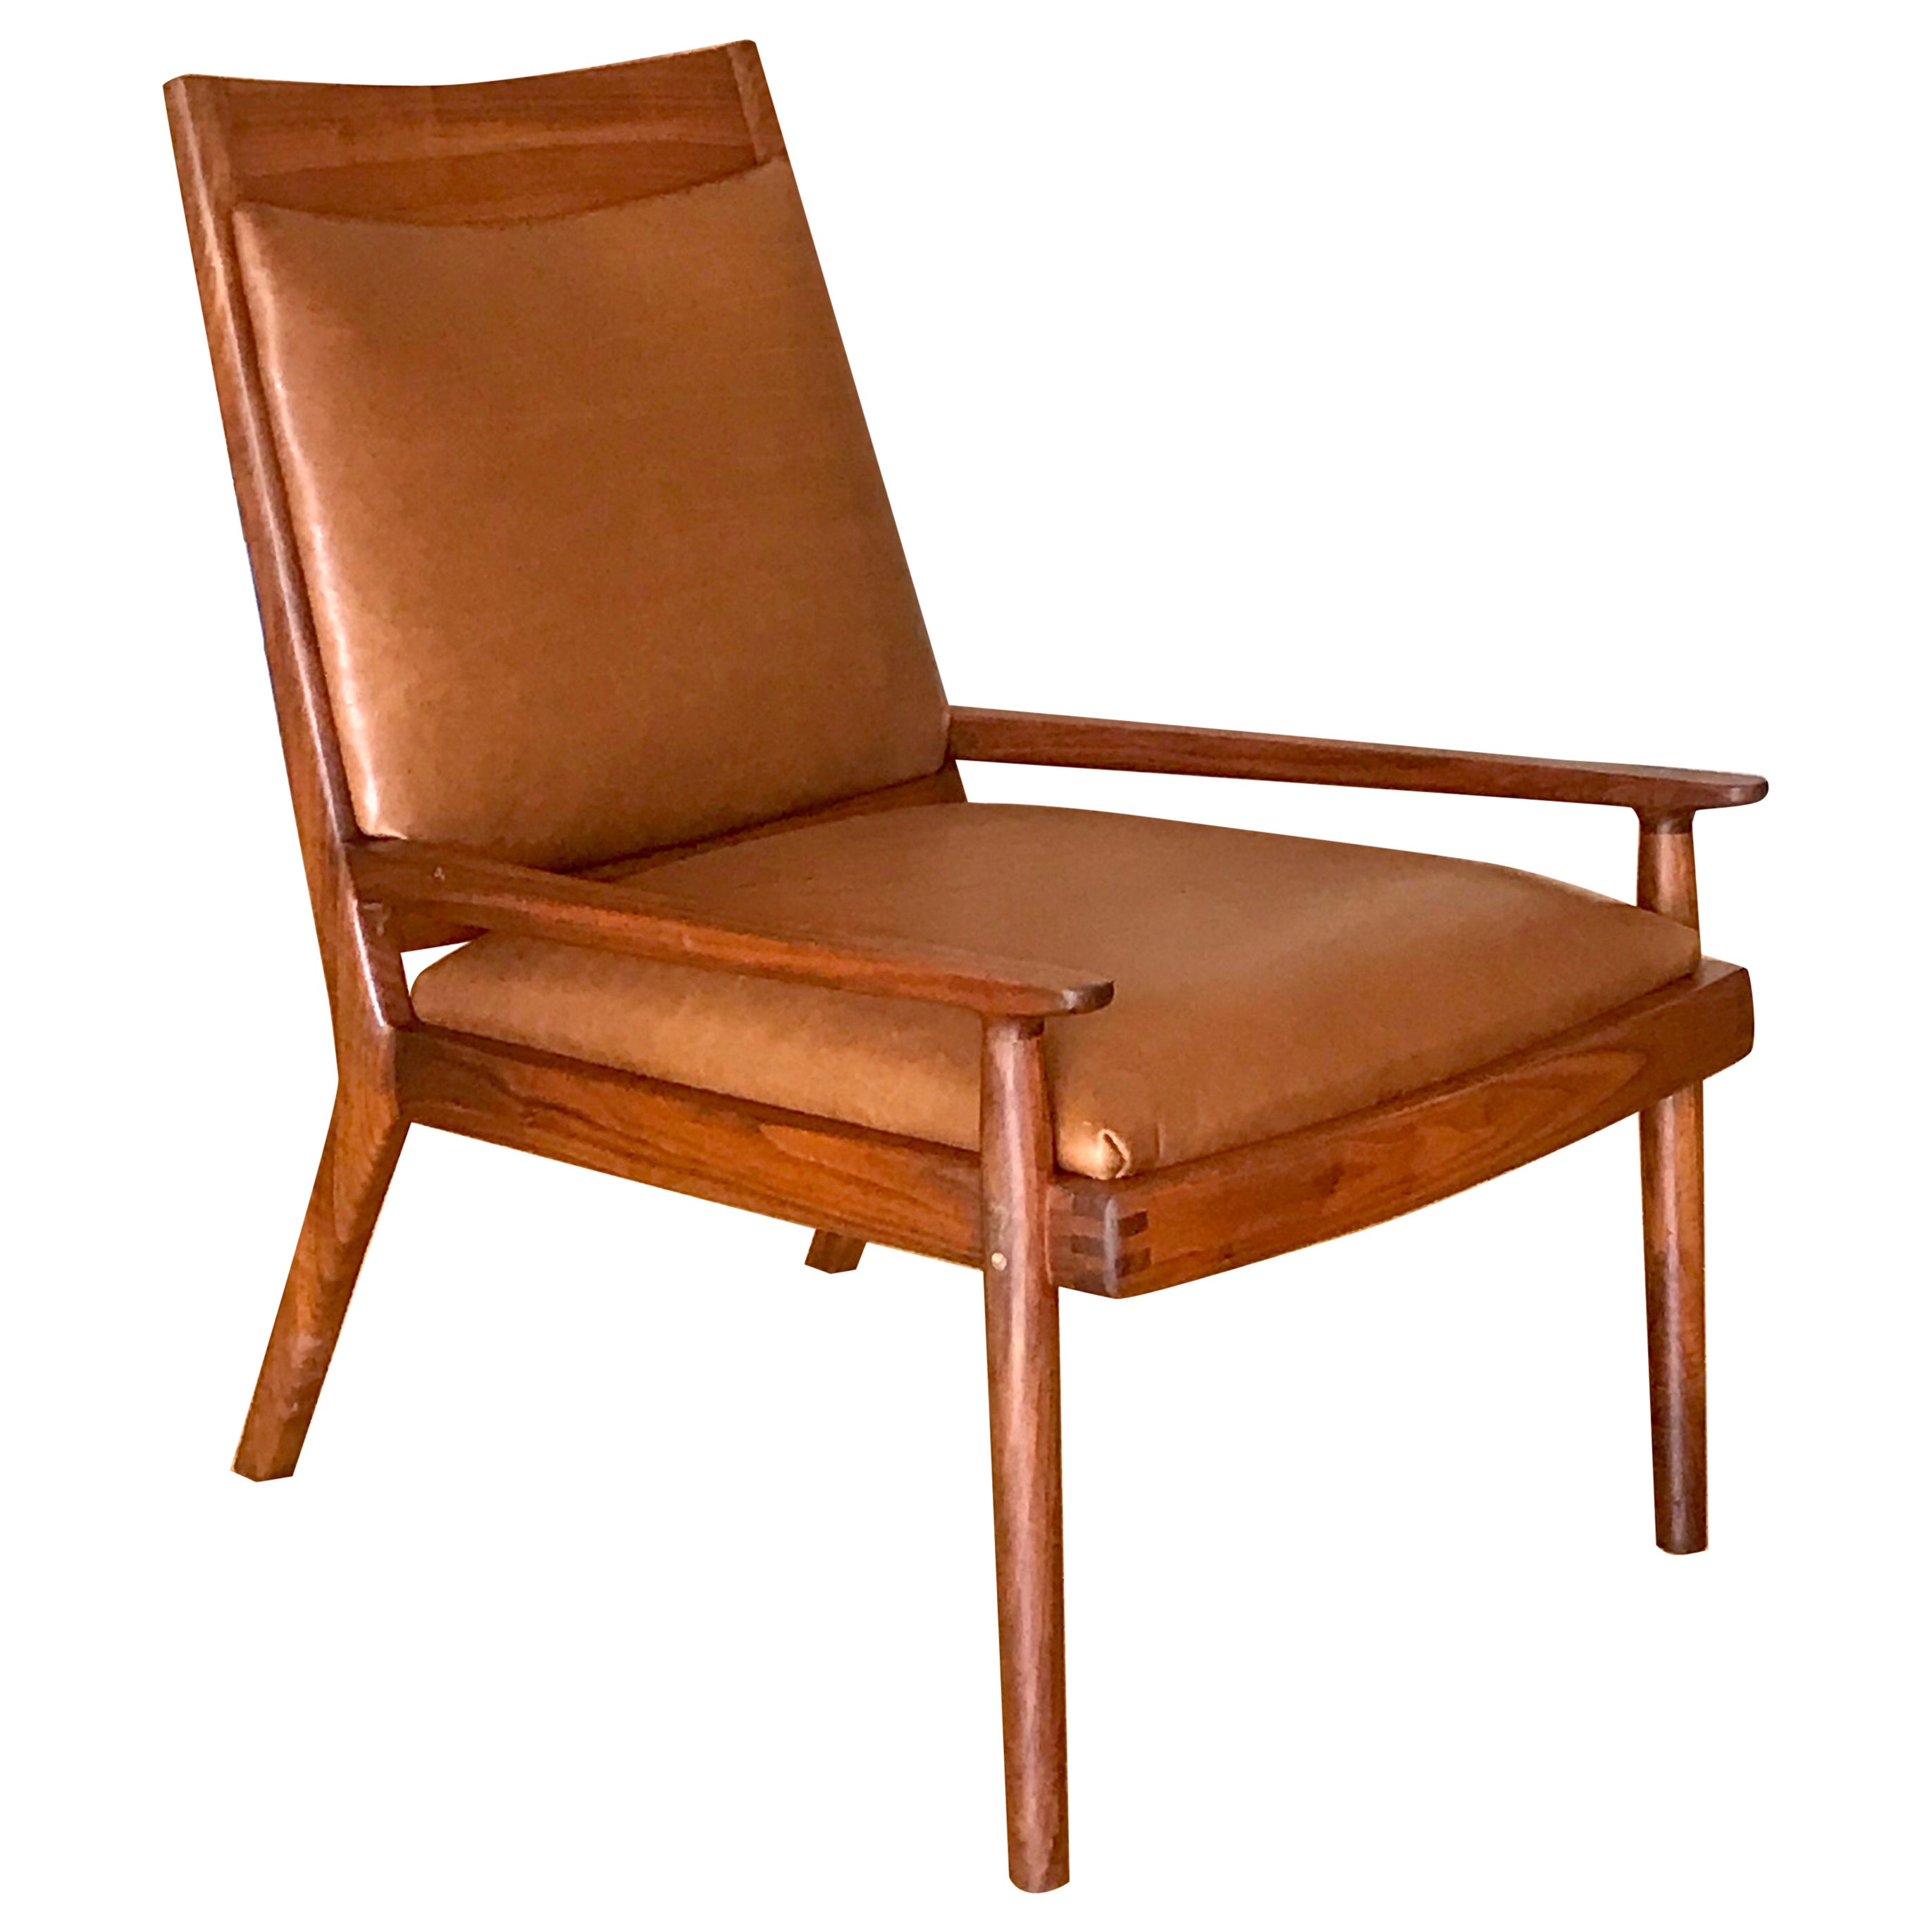 Modern Studio Craft Leather Lounge Chair After Maloof  